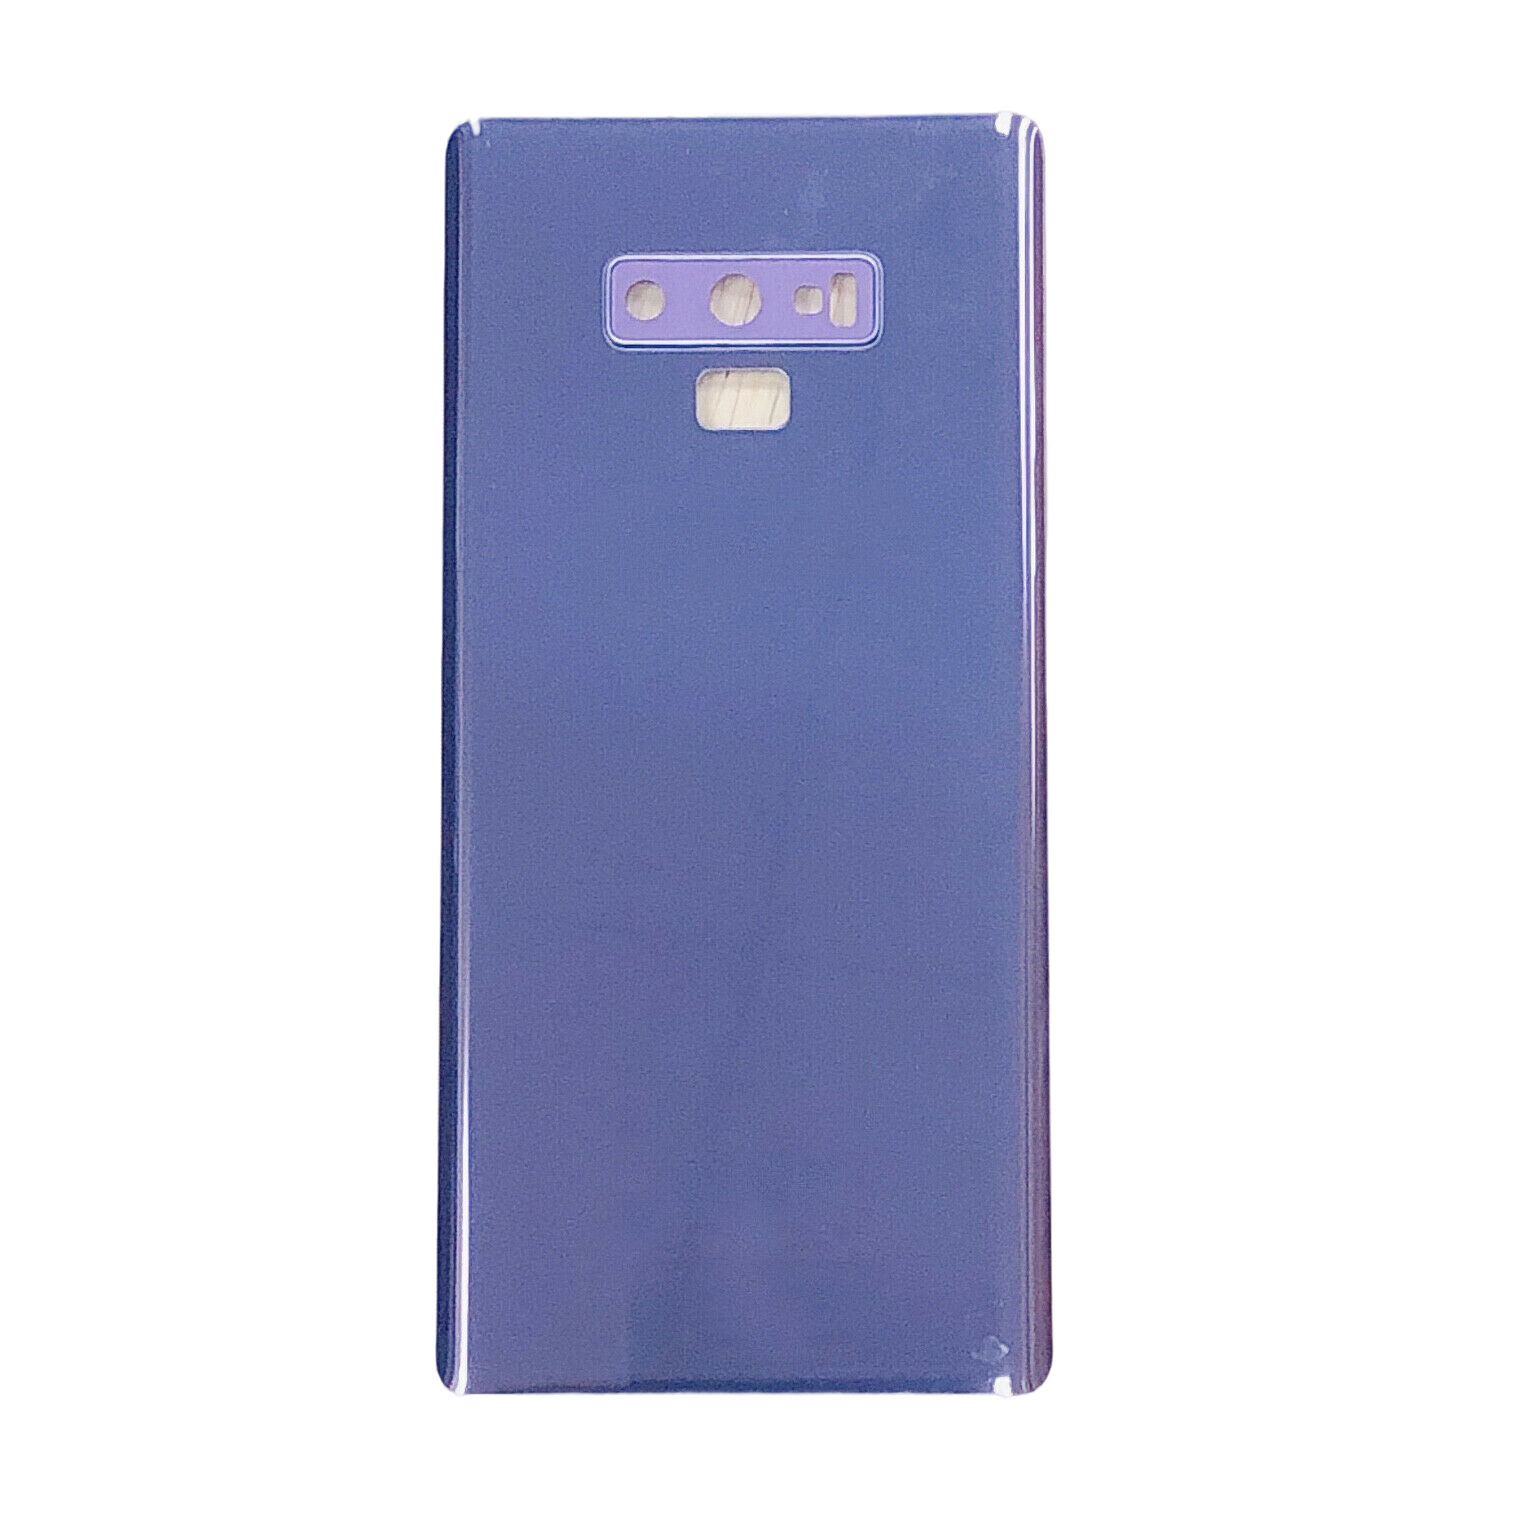 Genuine Back Cover Replacement Housing door with Frame for Samsung Galaxy Note 9